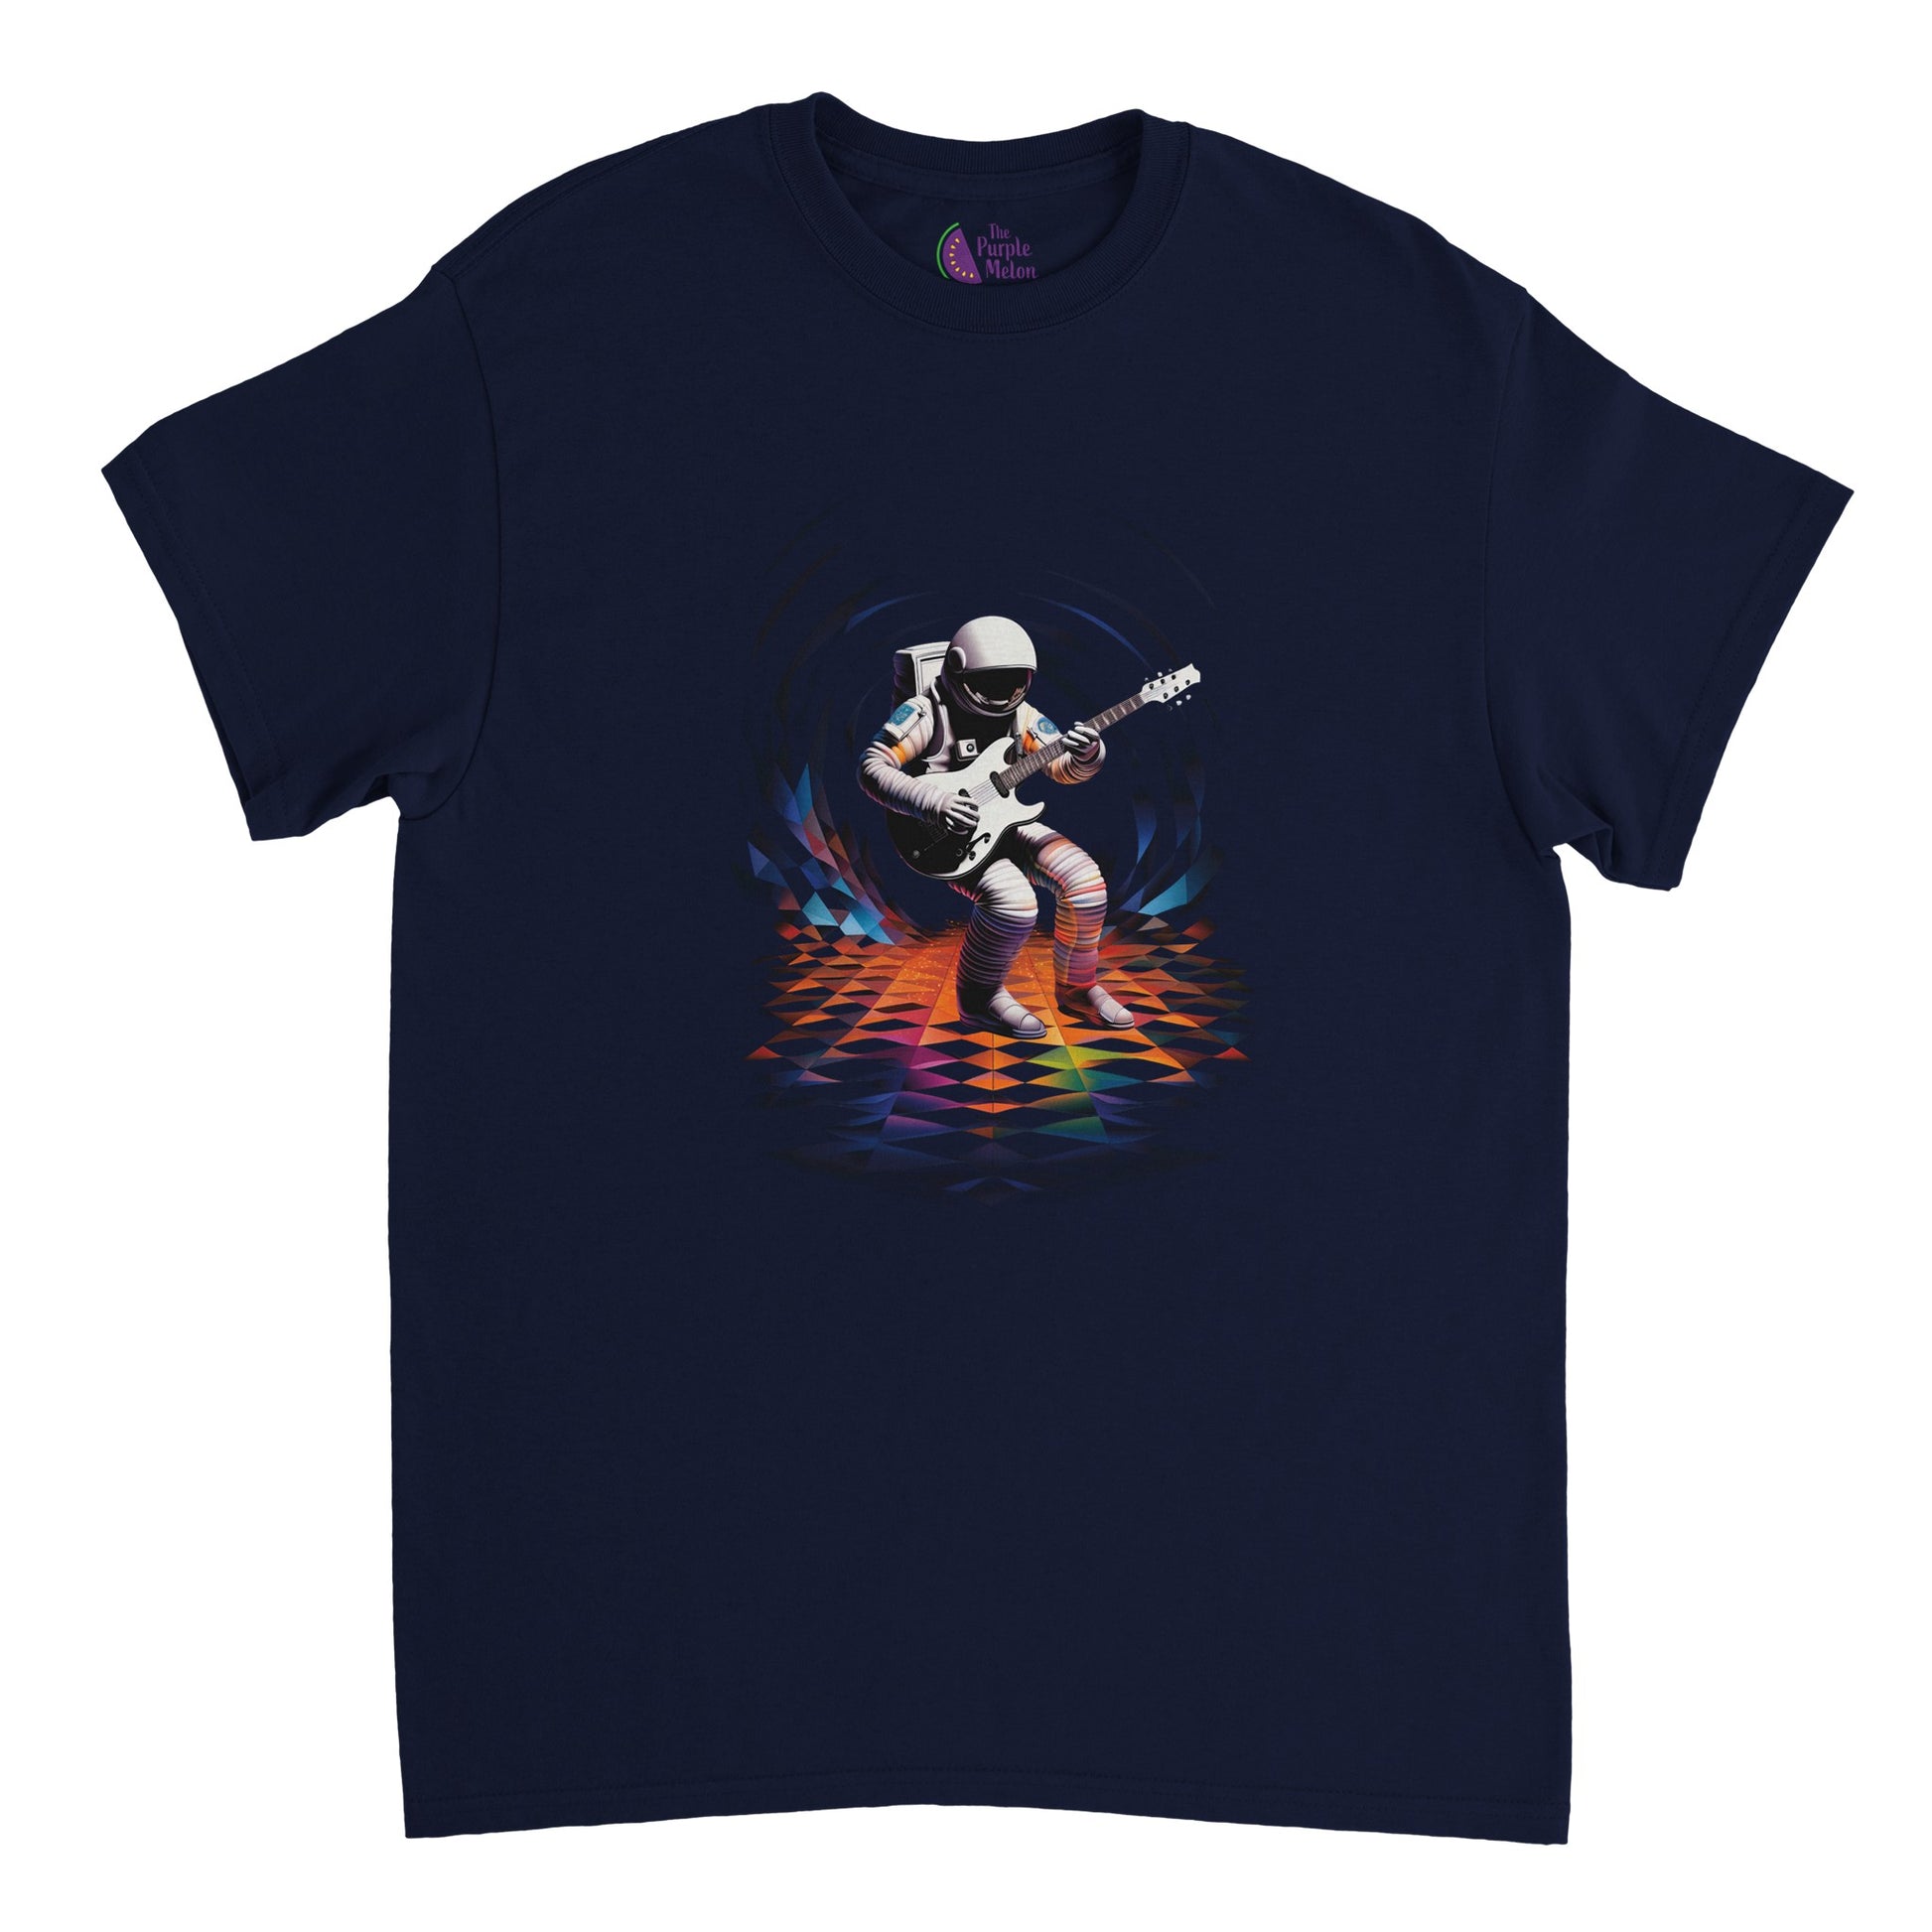 navy-blue t-shirt with a spaceman playing guitar print